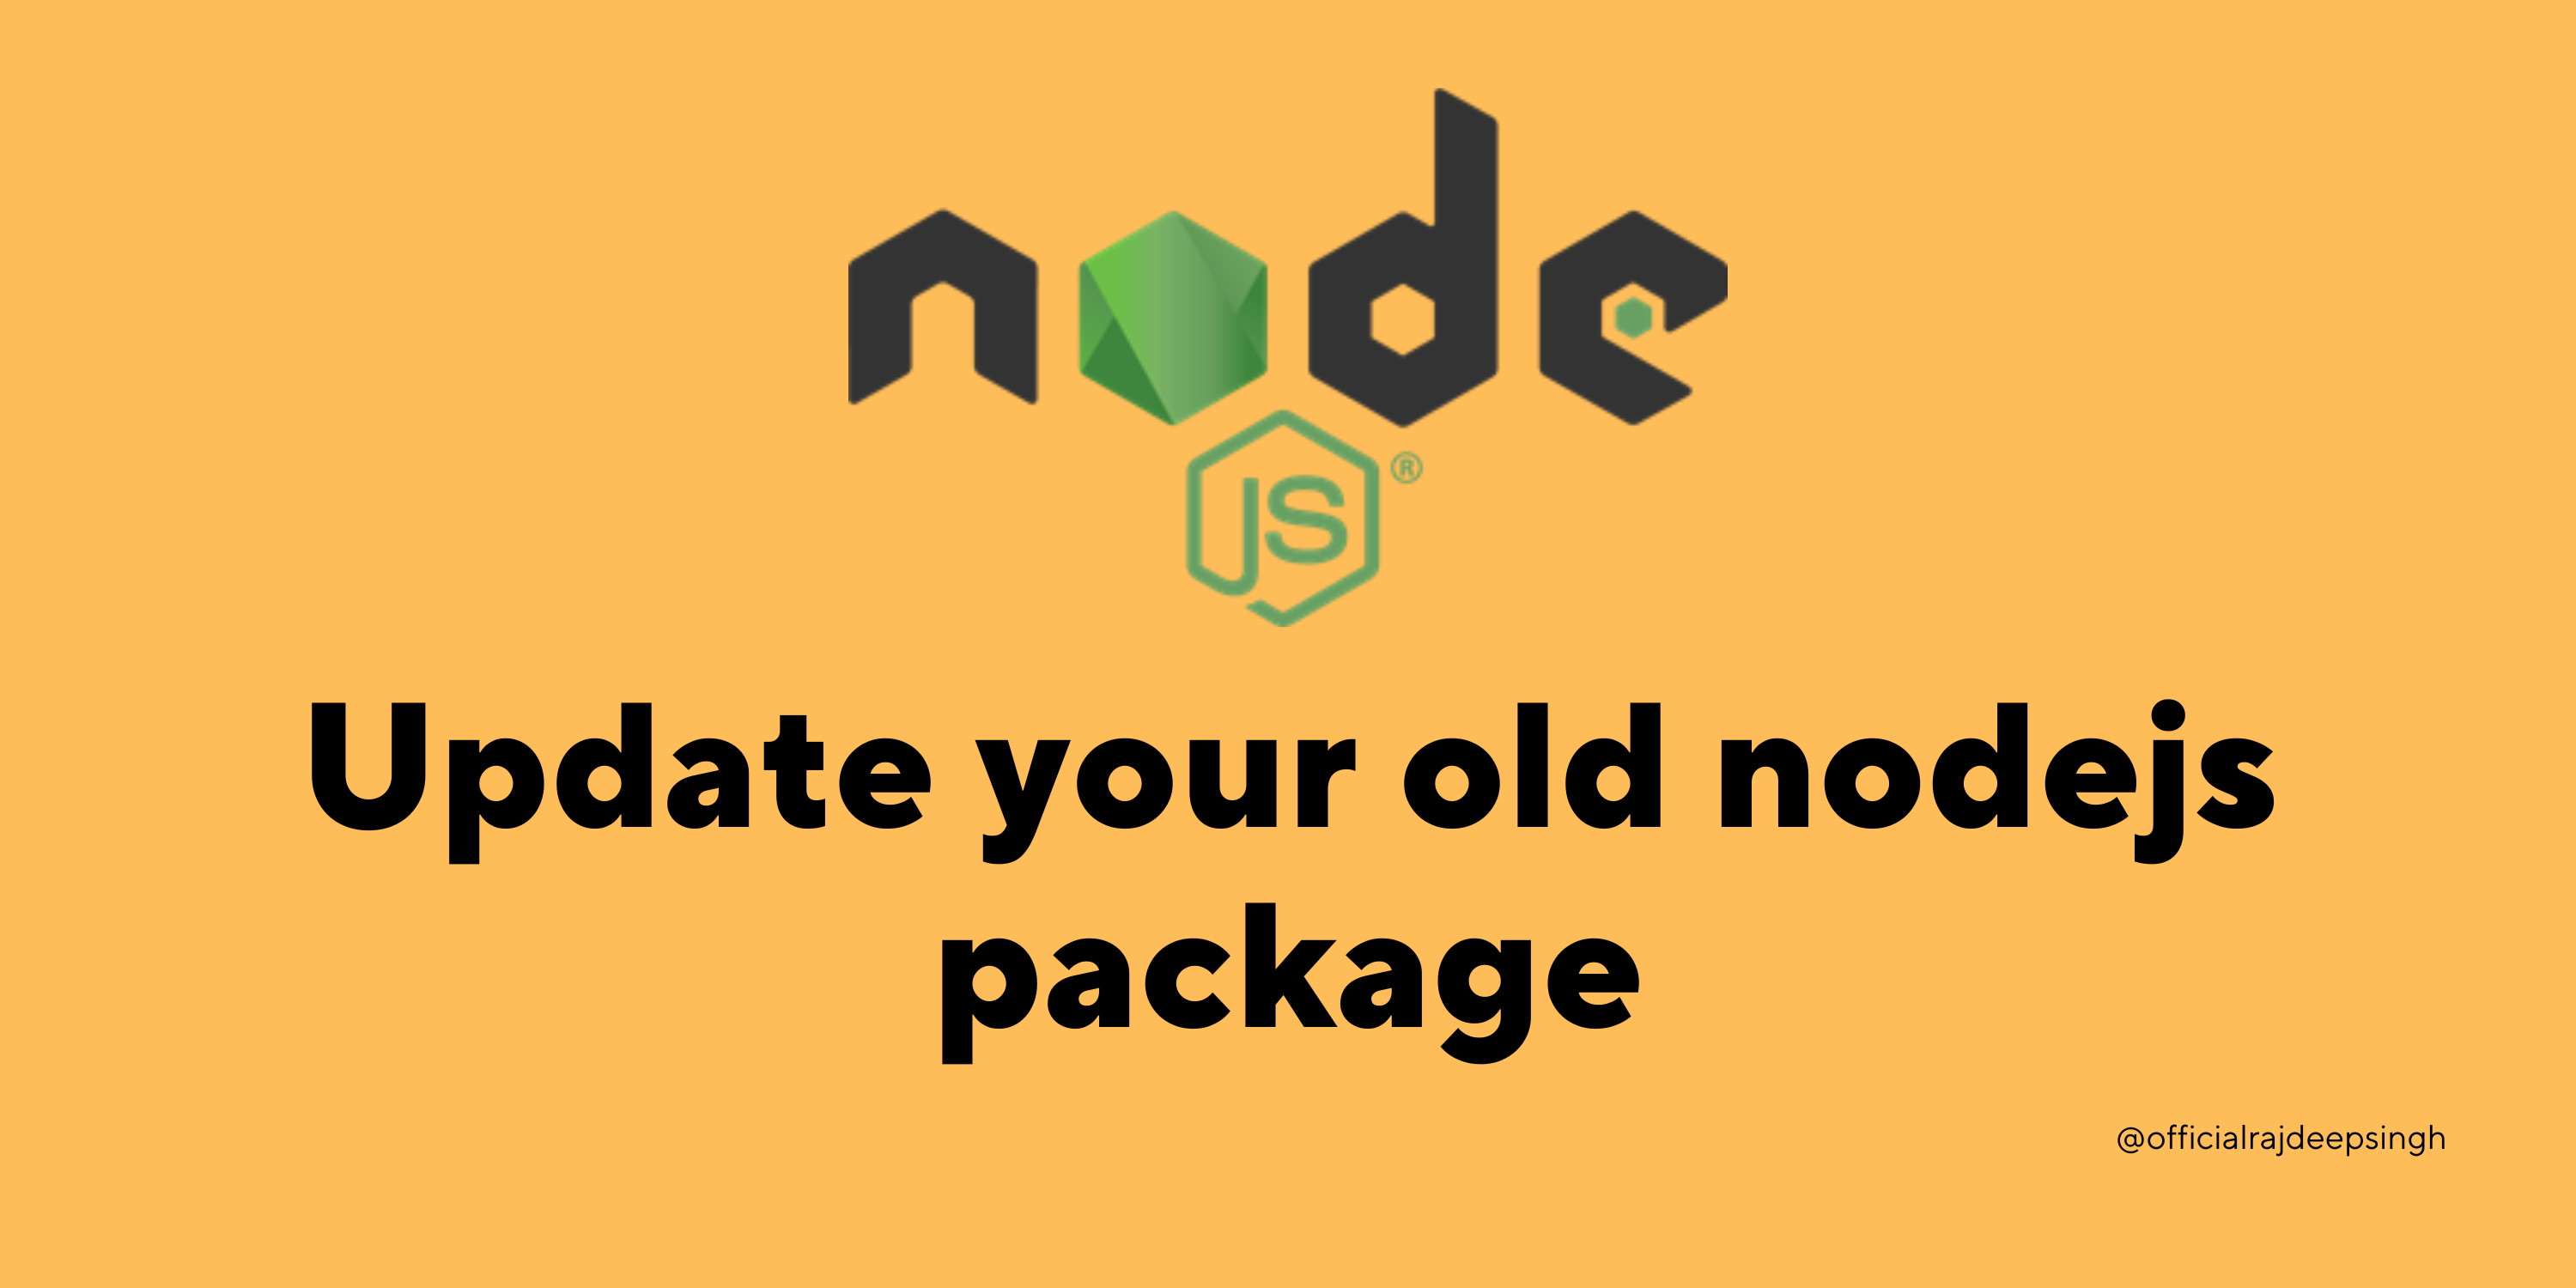 How do you update your project's old nodejs package with a single npm command?